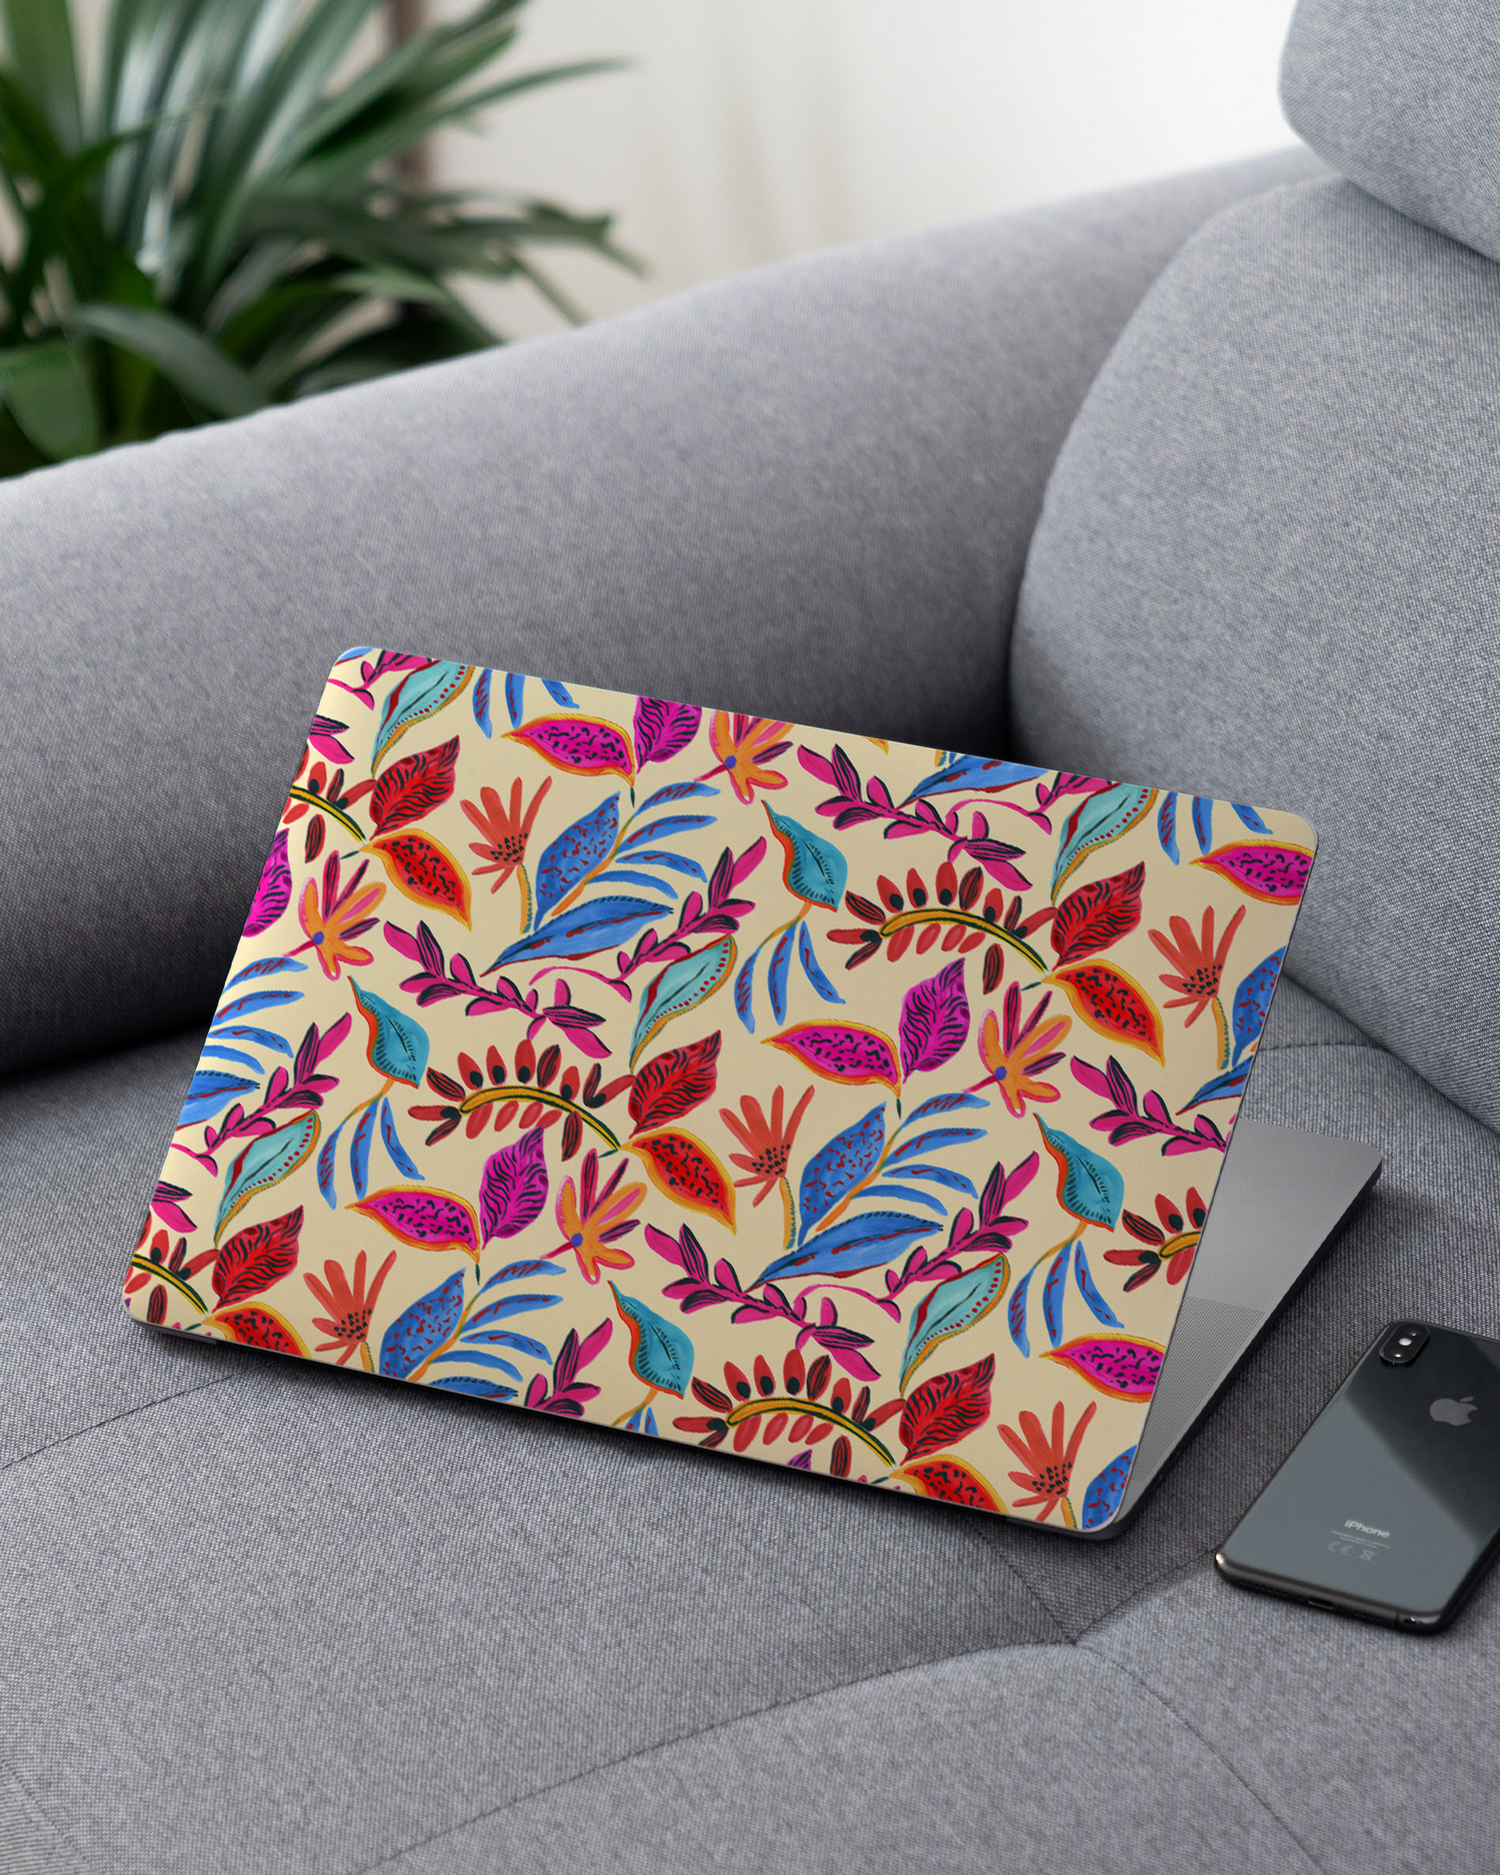 Painterly Spring Leaves Laptop Skin for 13 inch Apple MacBooks on a couch